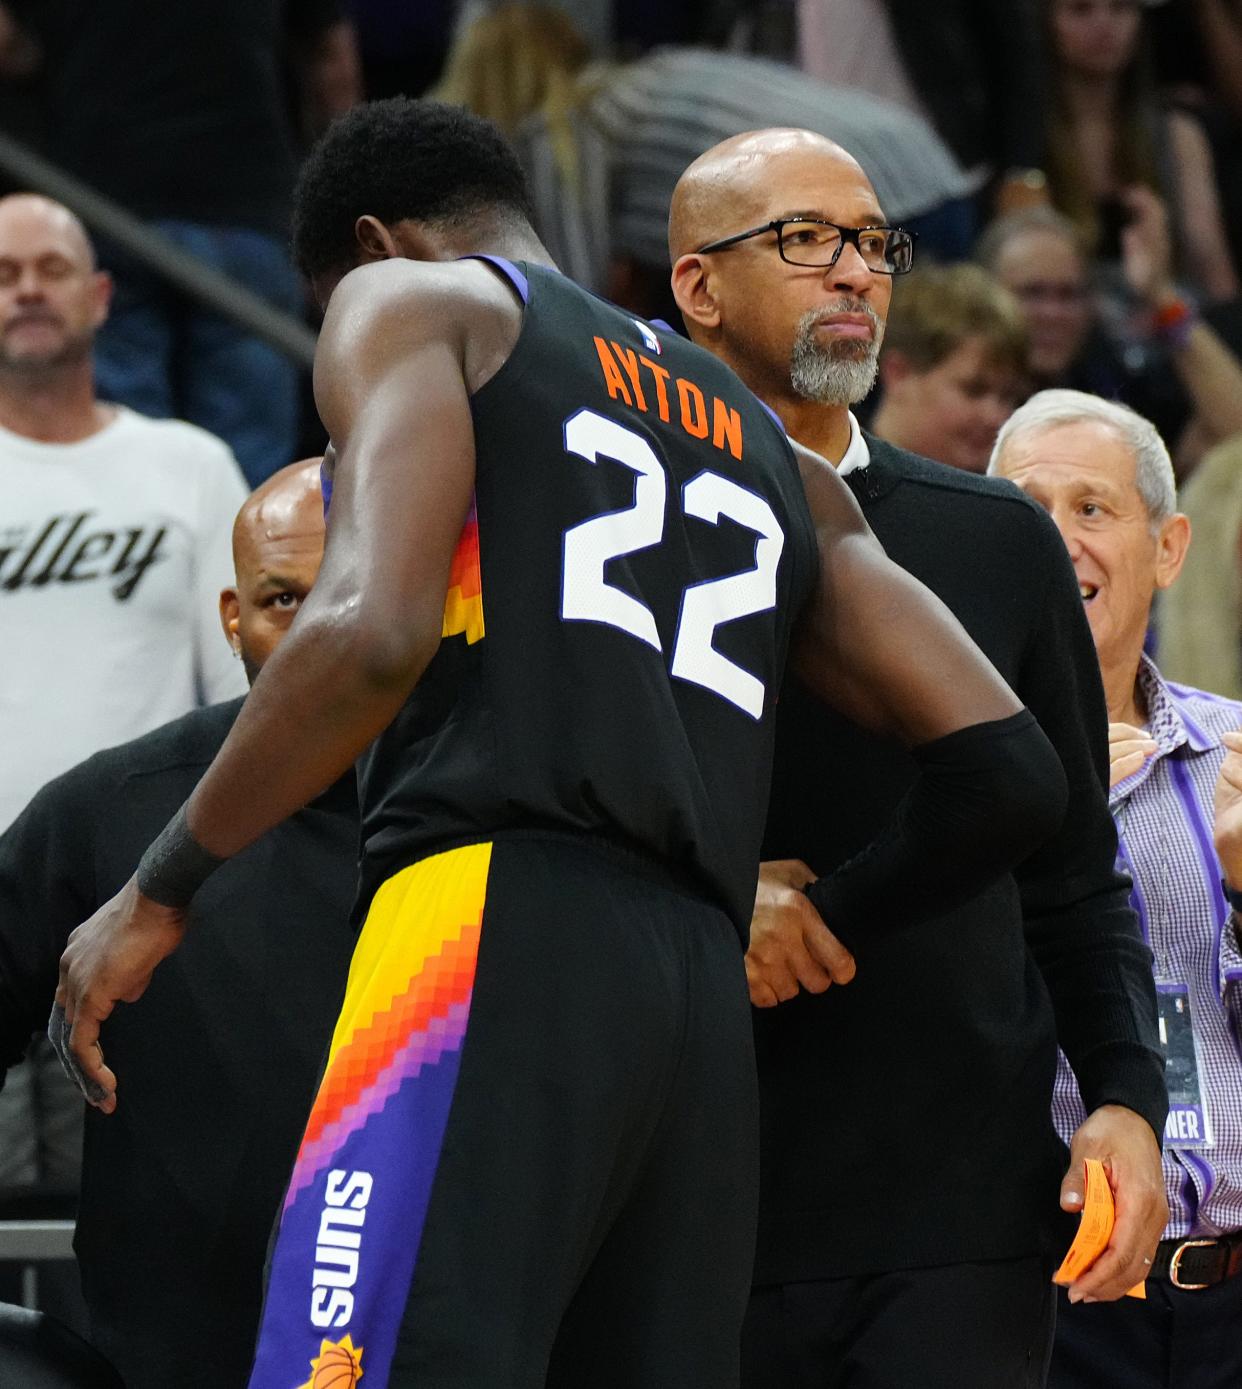 May 10, 2022; Phoenix, Arizona; USA; Suns head coach Monty Williams greets Deandre Ayton (22) as he subs him off during game 5 of the second round of the Western Conference Playoffs.